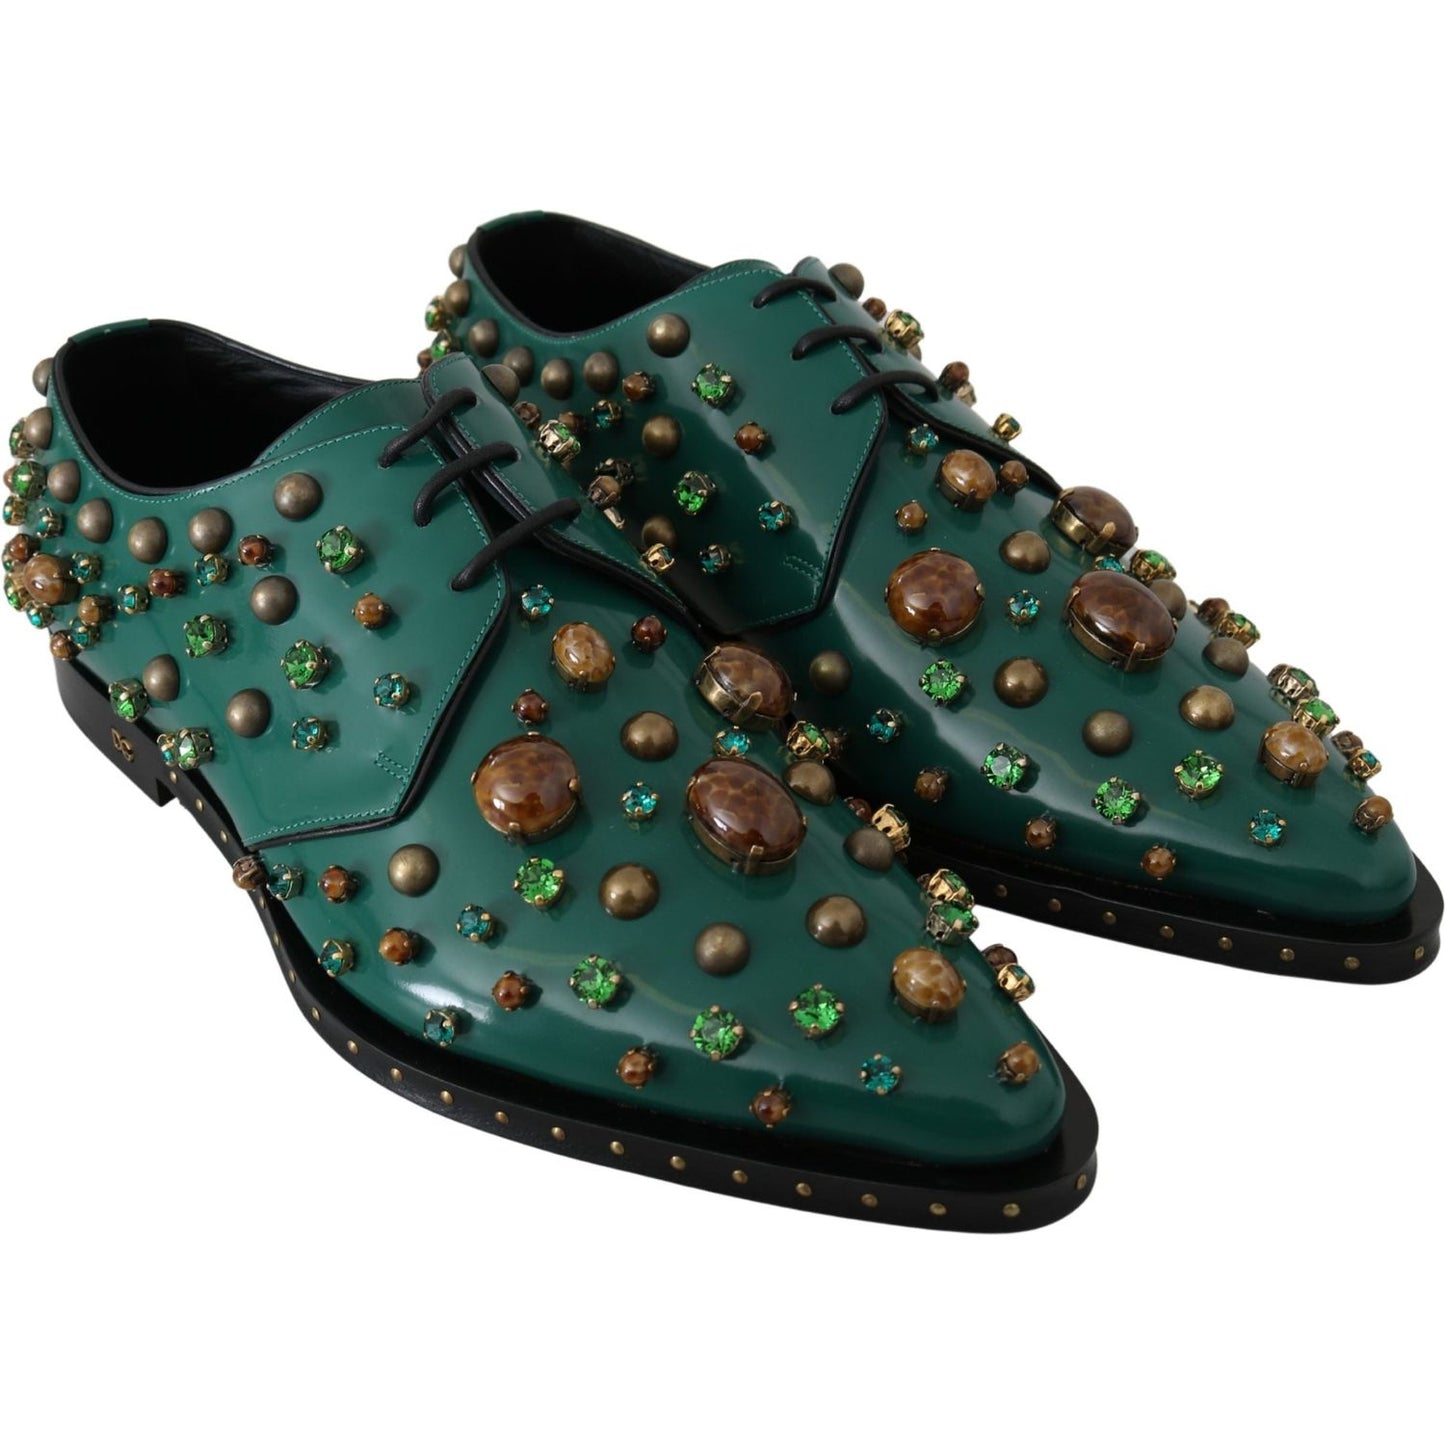 Dolce & Gabbana Emerald Leather Dress Shoes with Crystal Accents green-leather-crystal-dress-broque-shoes IMG_1564-scaled-c8fd60cb-a1b.jpg